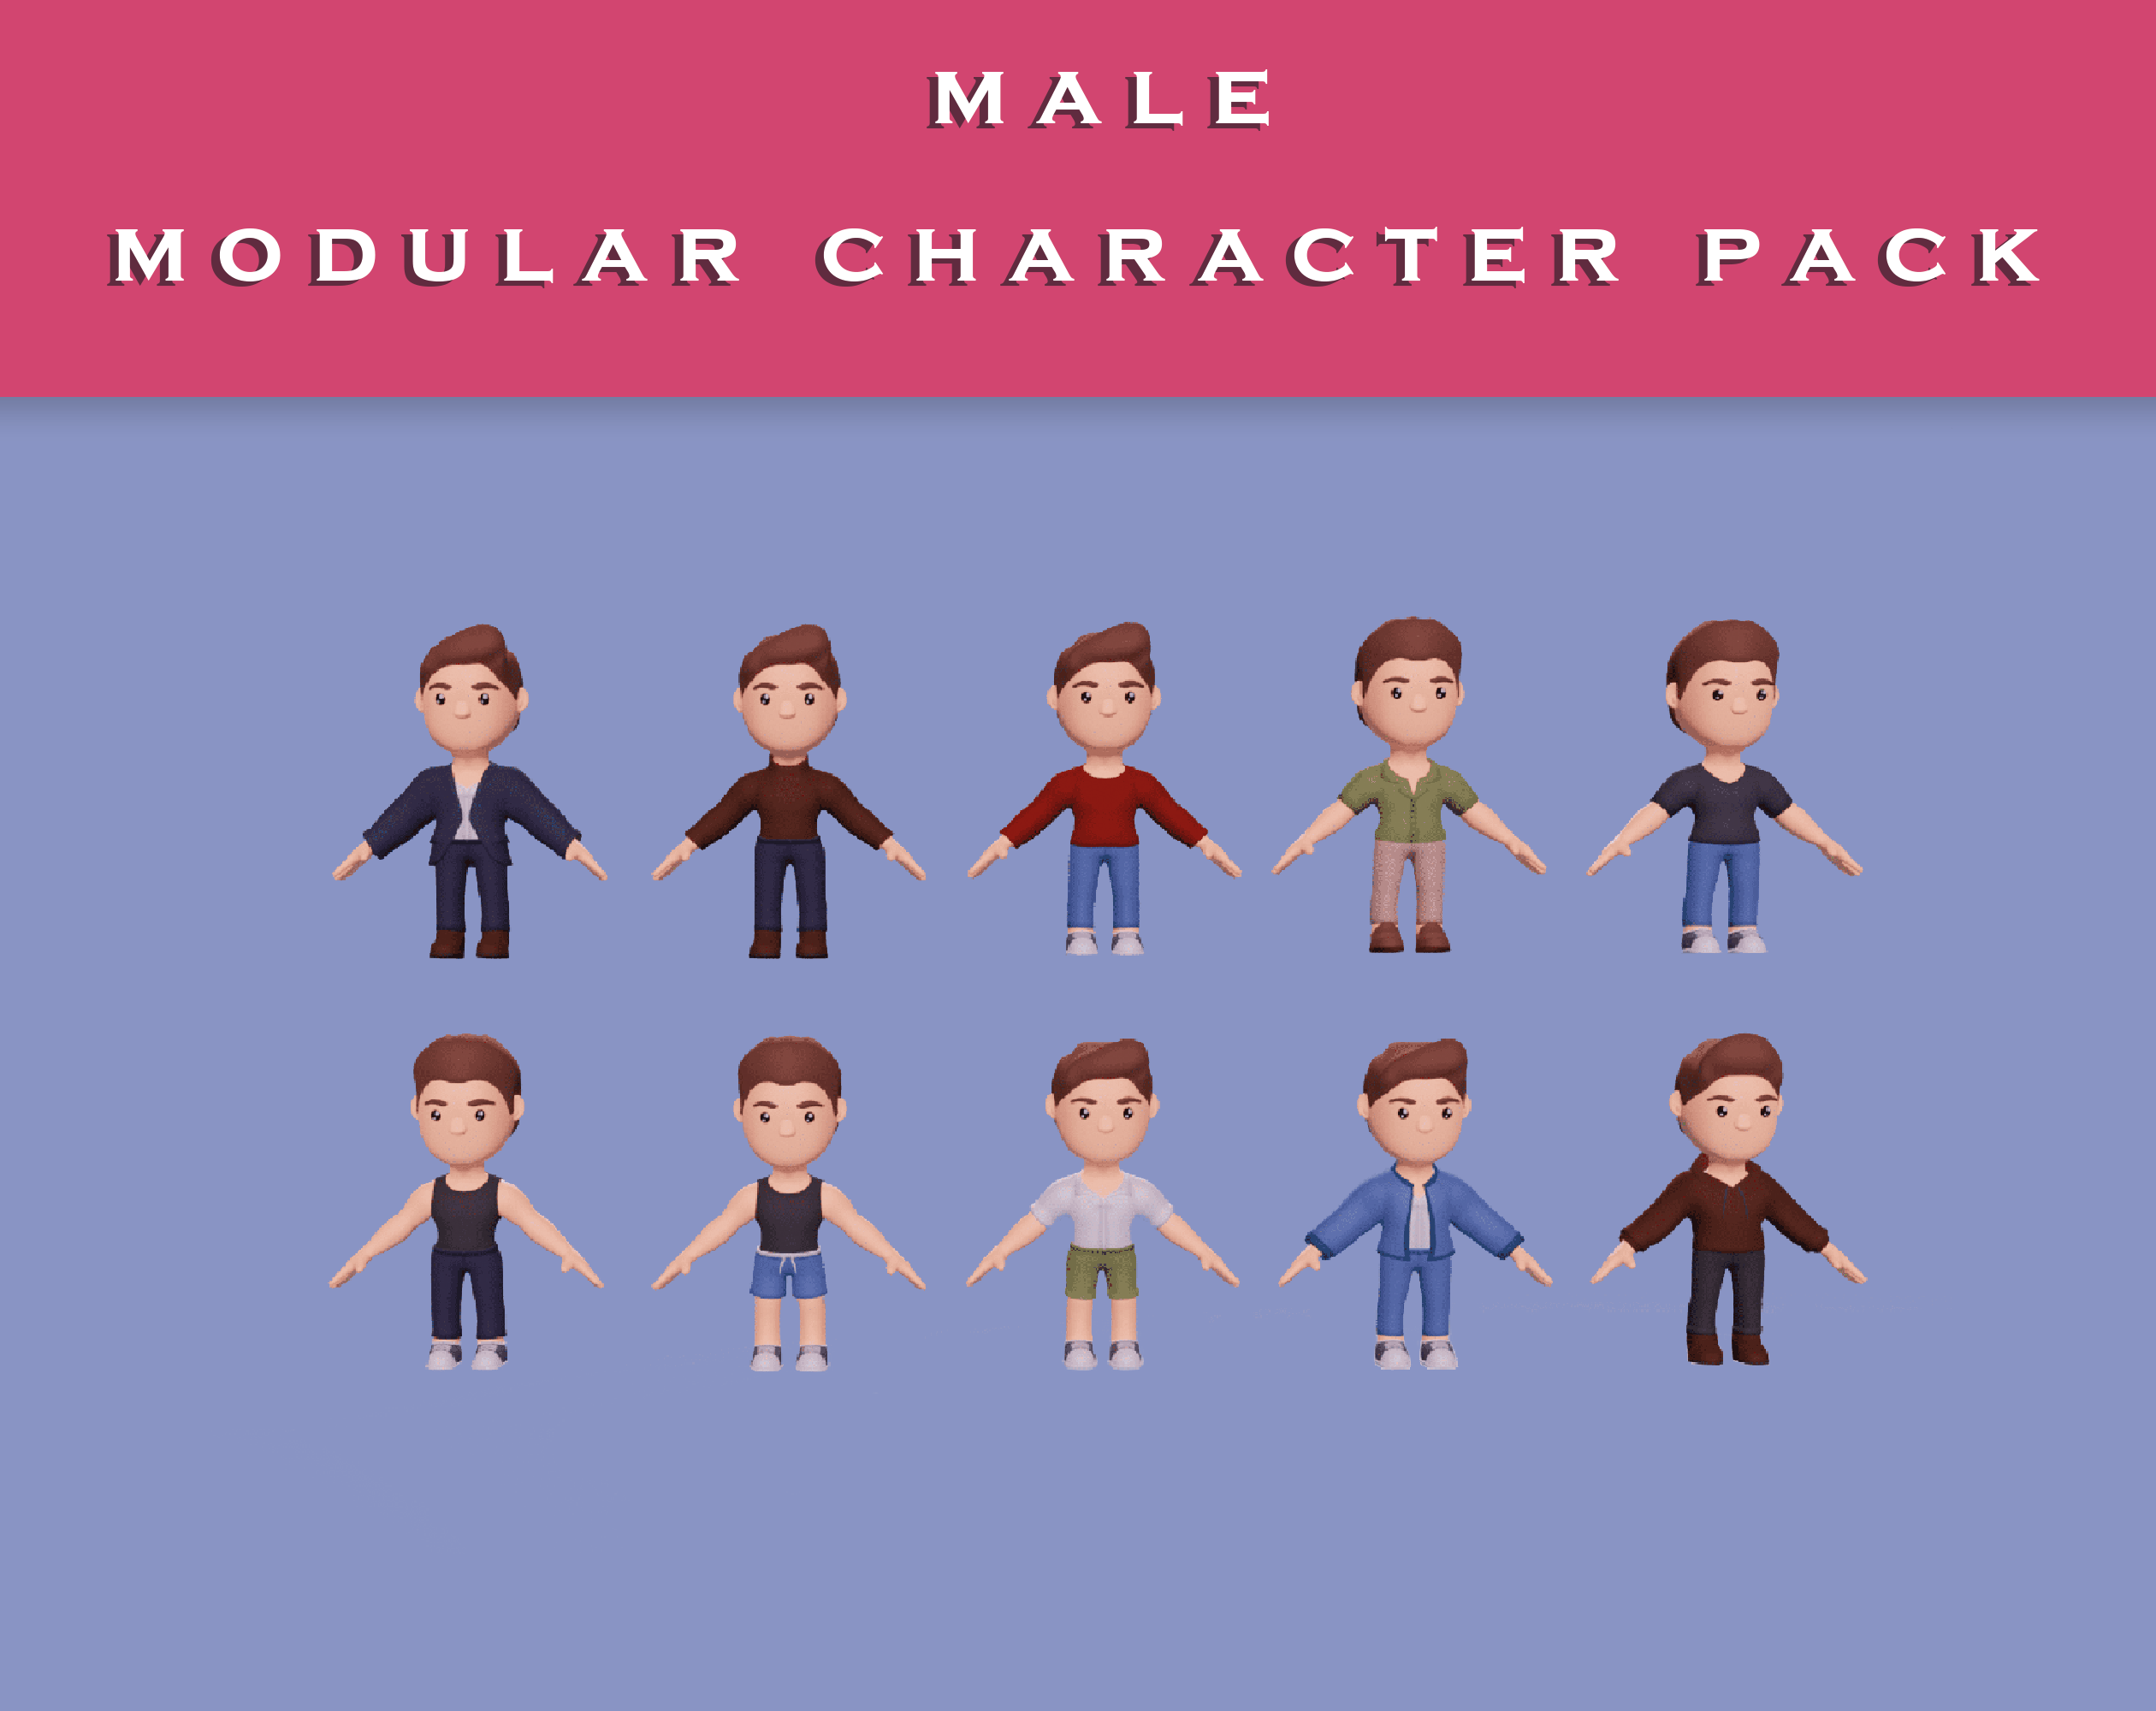 Low Poly Modular Character Assets - Male Pack